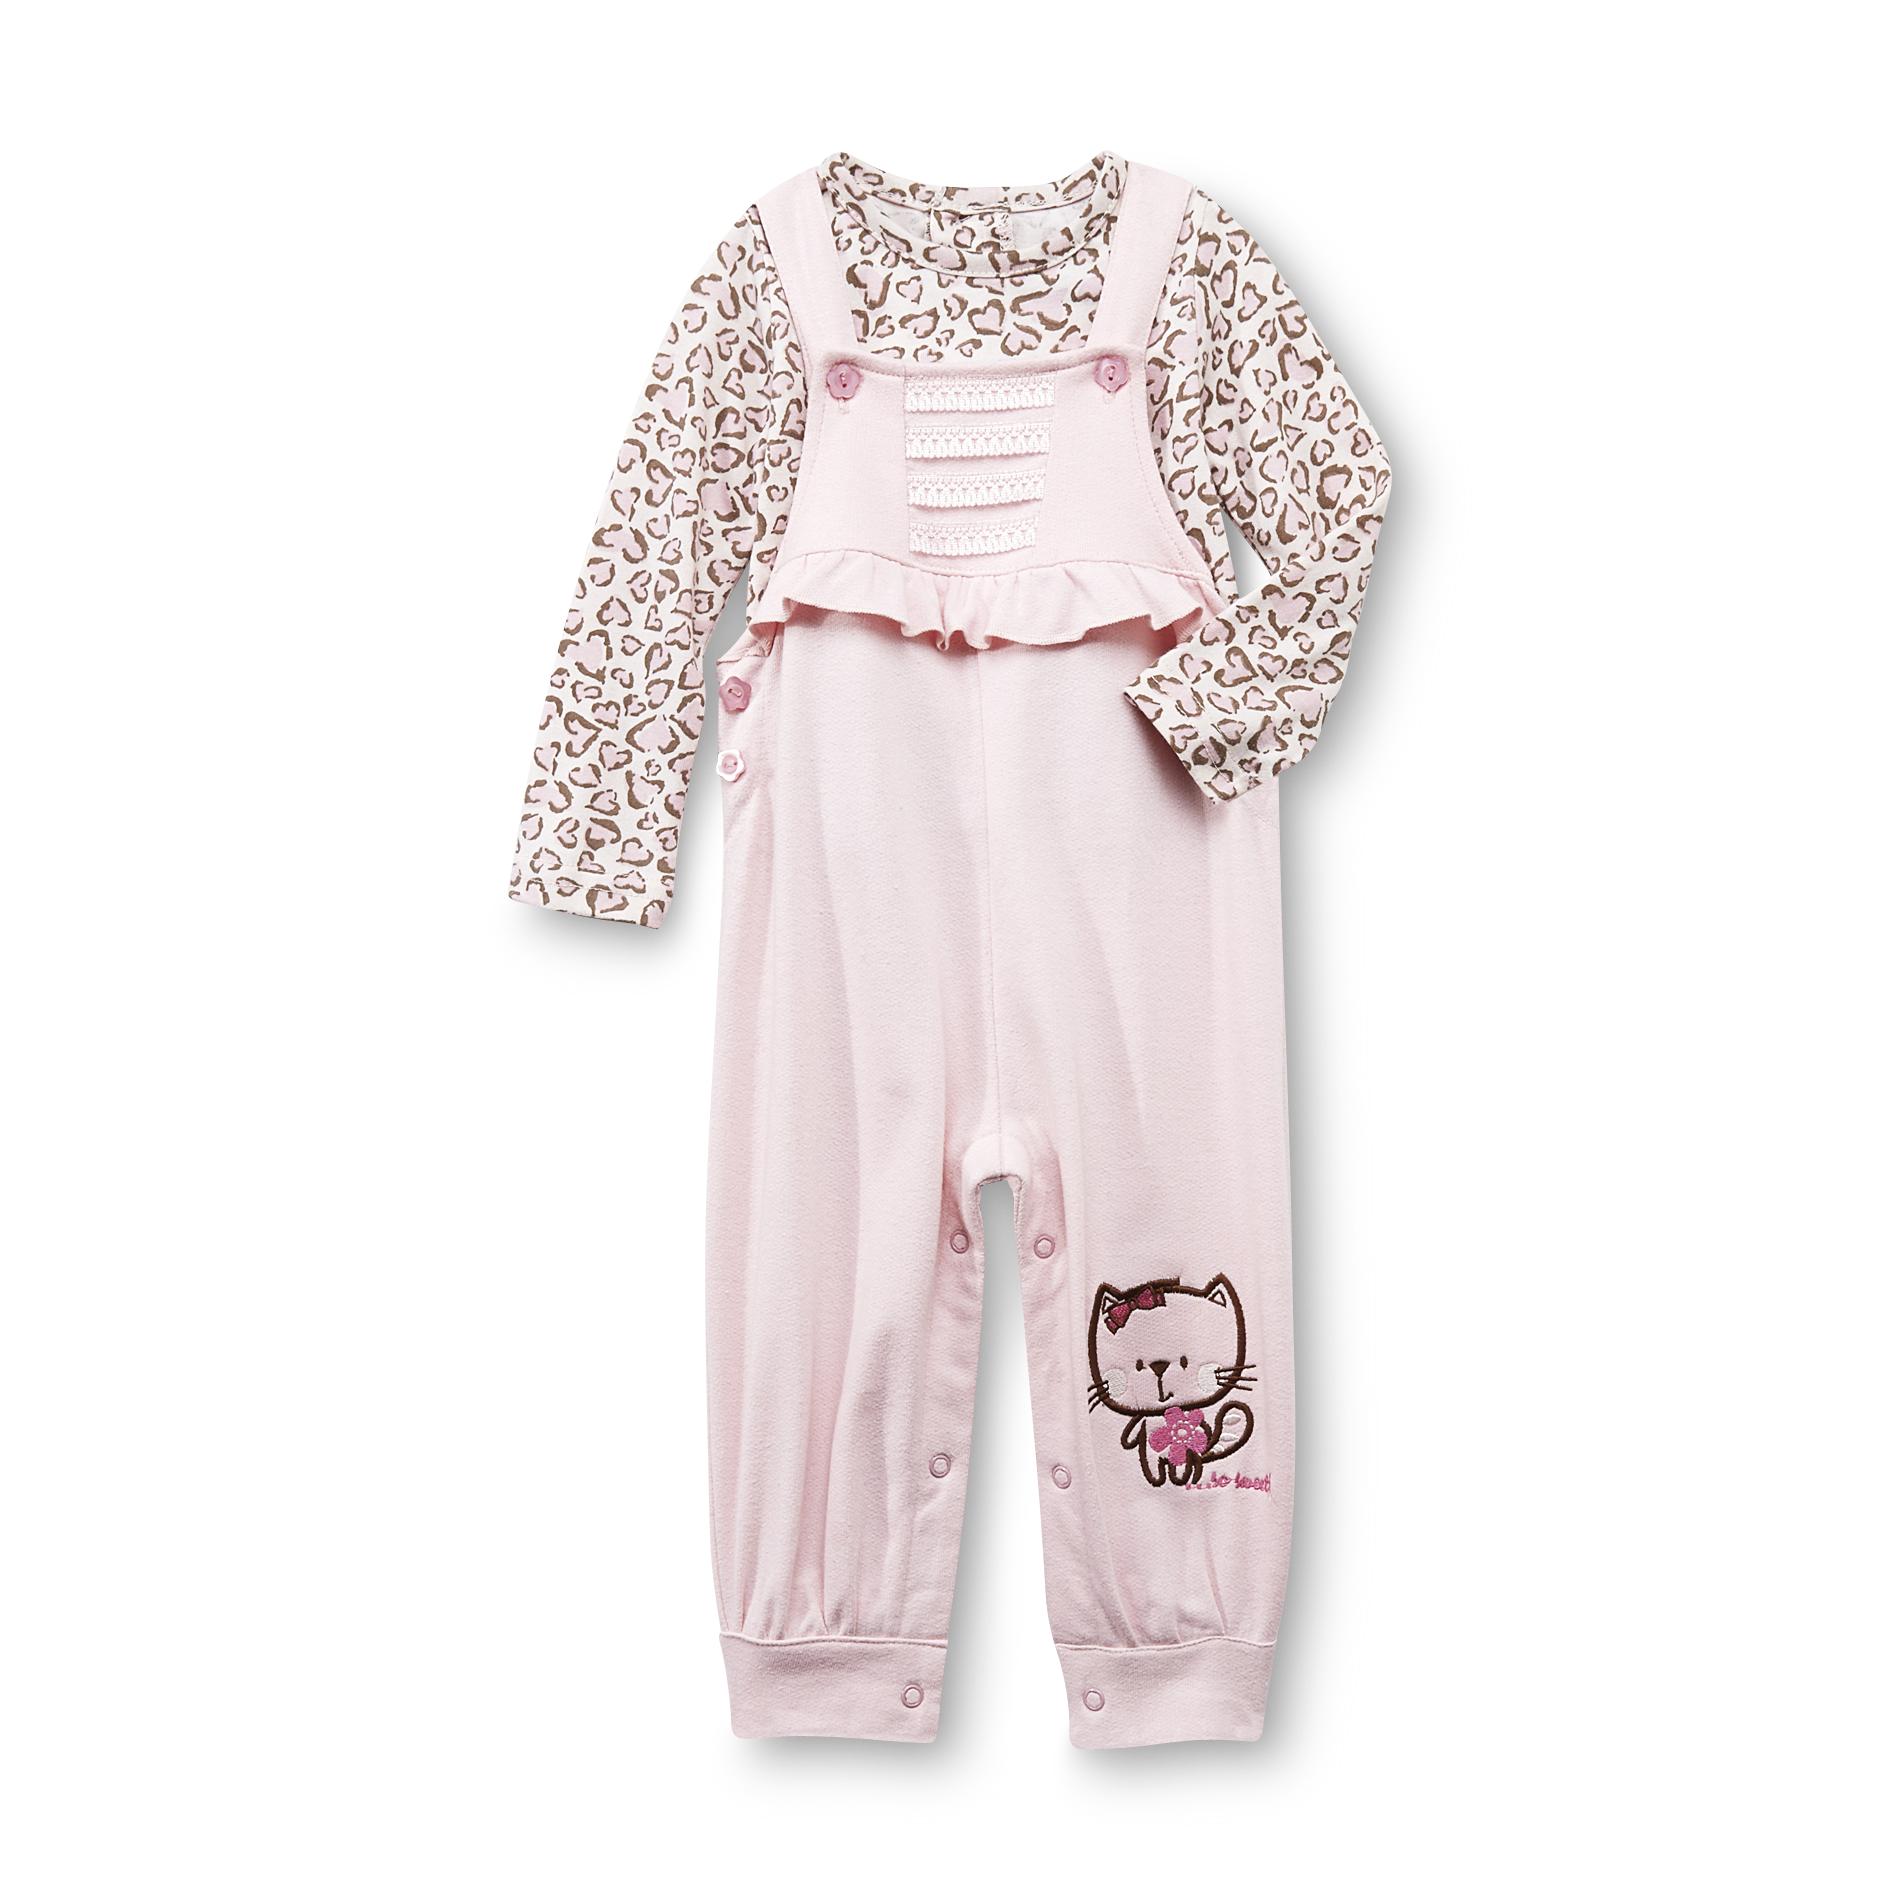 Small Wonders Infant Girl's Coverall & Top - Kitty